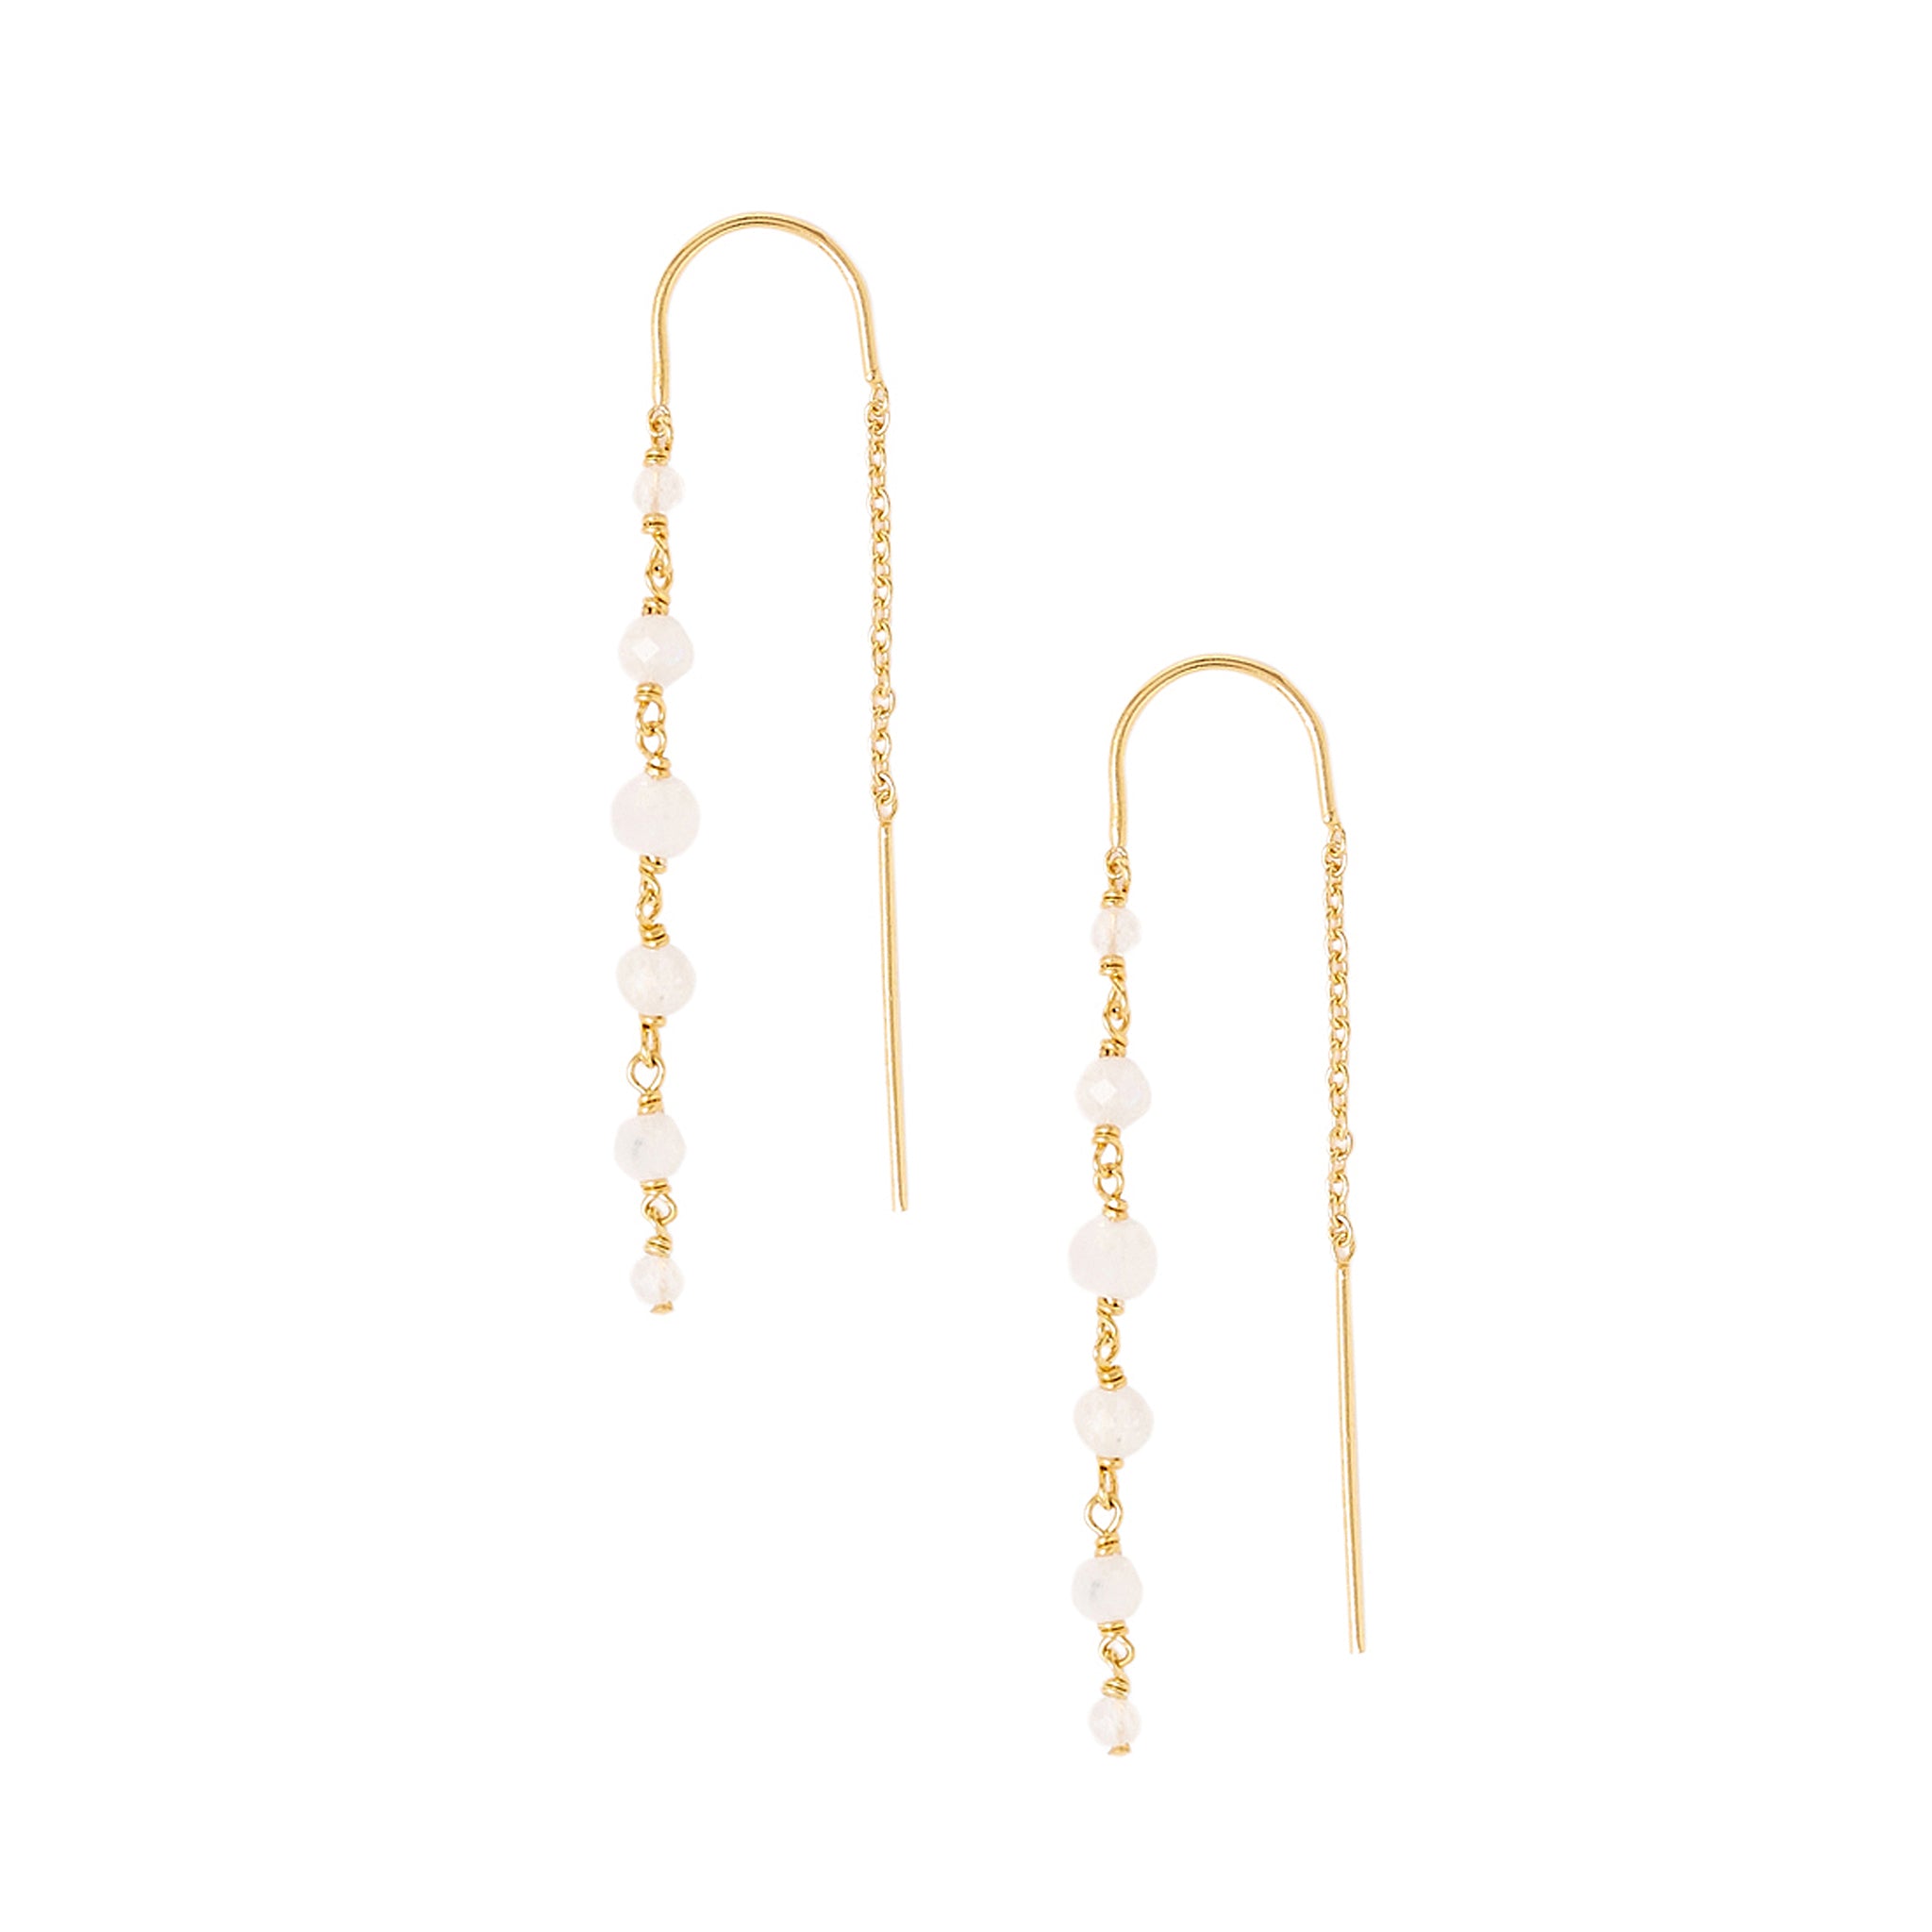 Chan Luu Tiered Threader Dangle Earrings in Moonstone and Gold